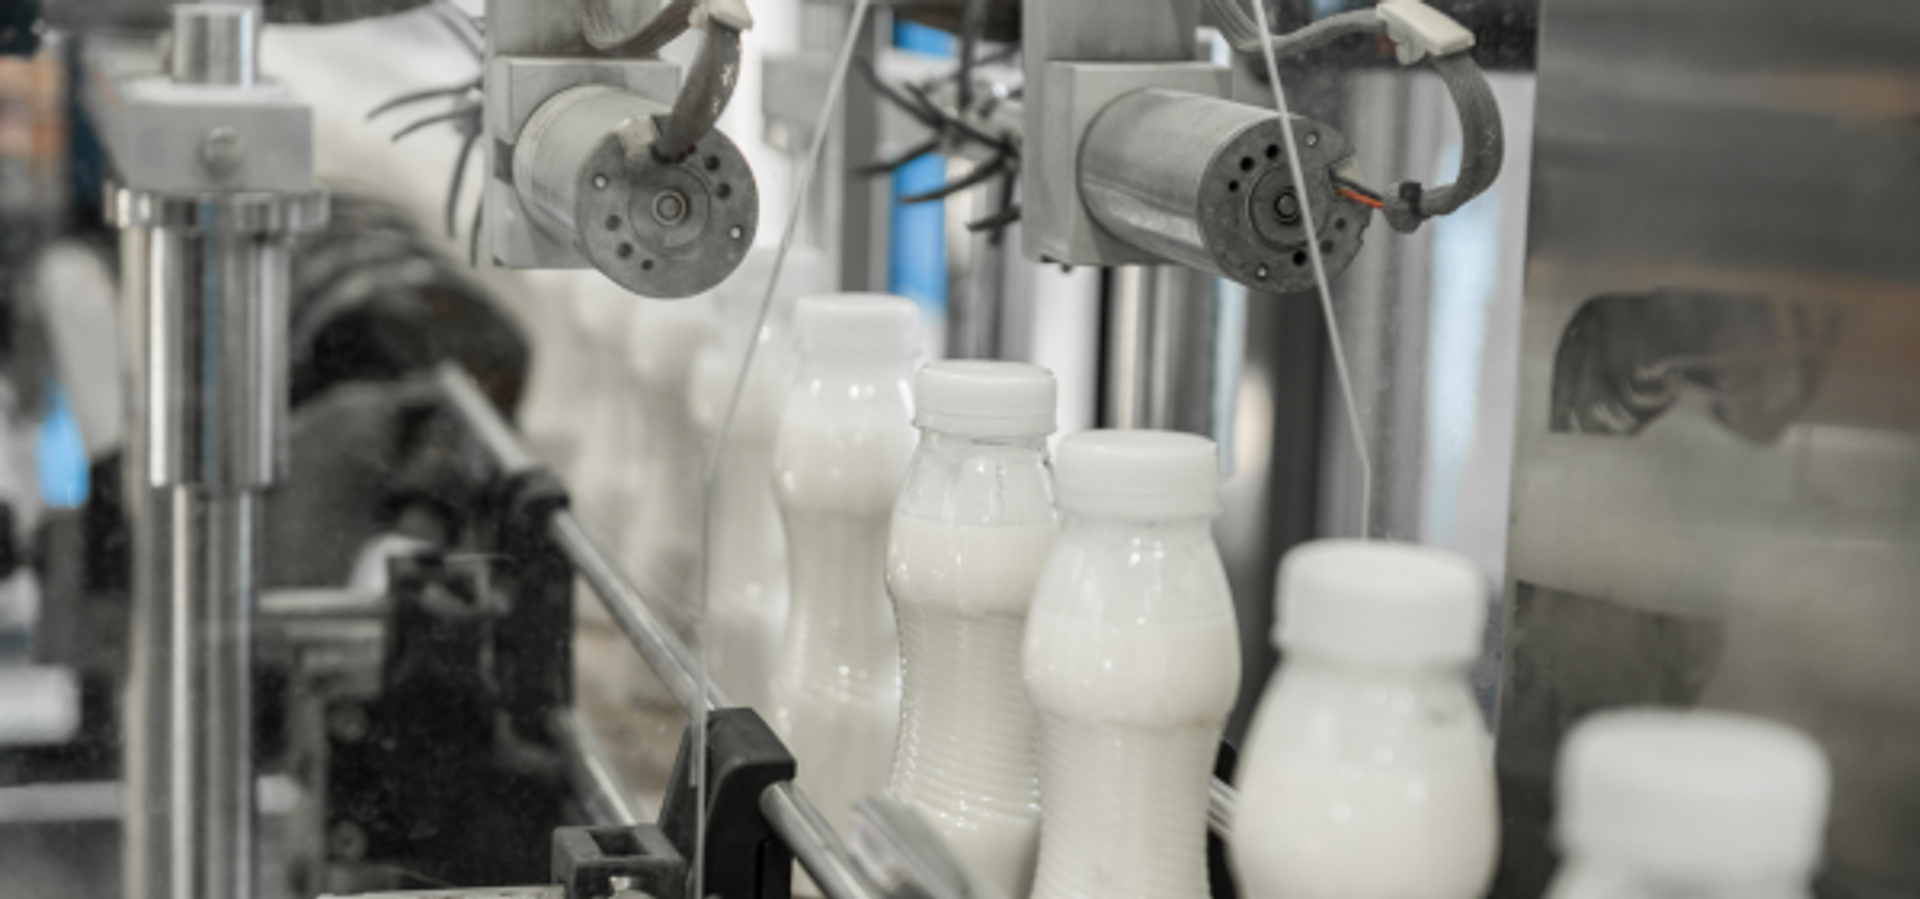 $40,000 Saved Per Year with Improved Settling at Dairy Plant